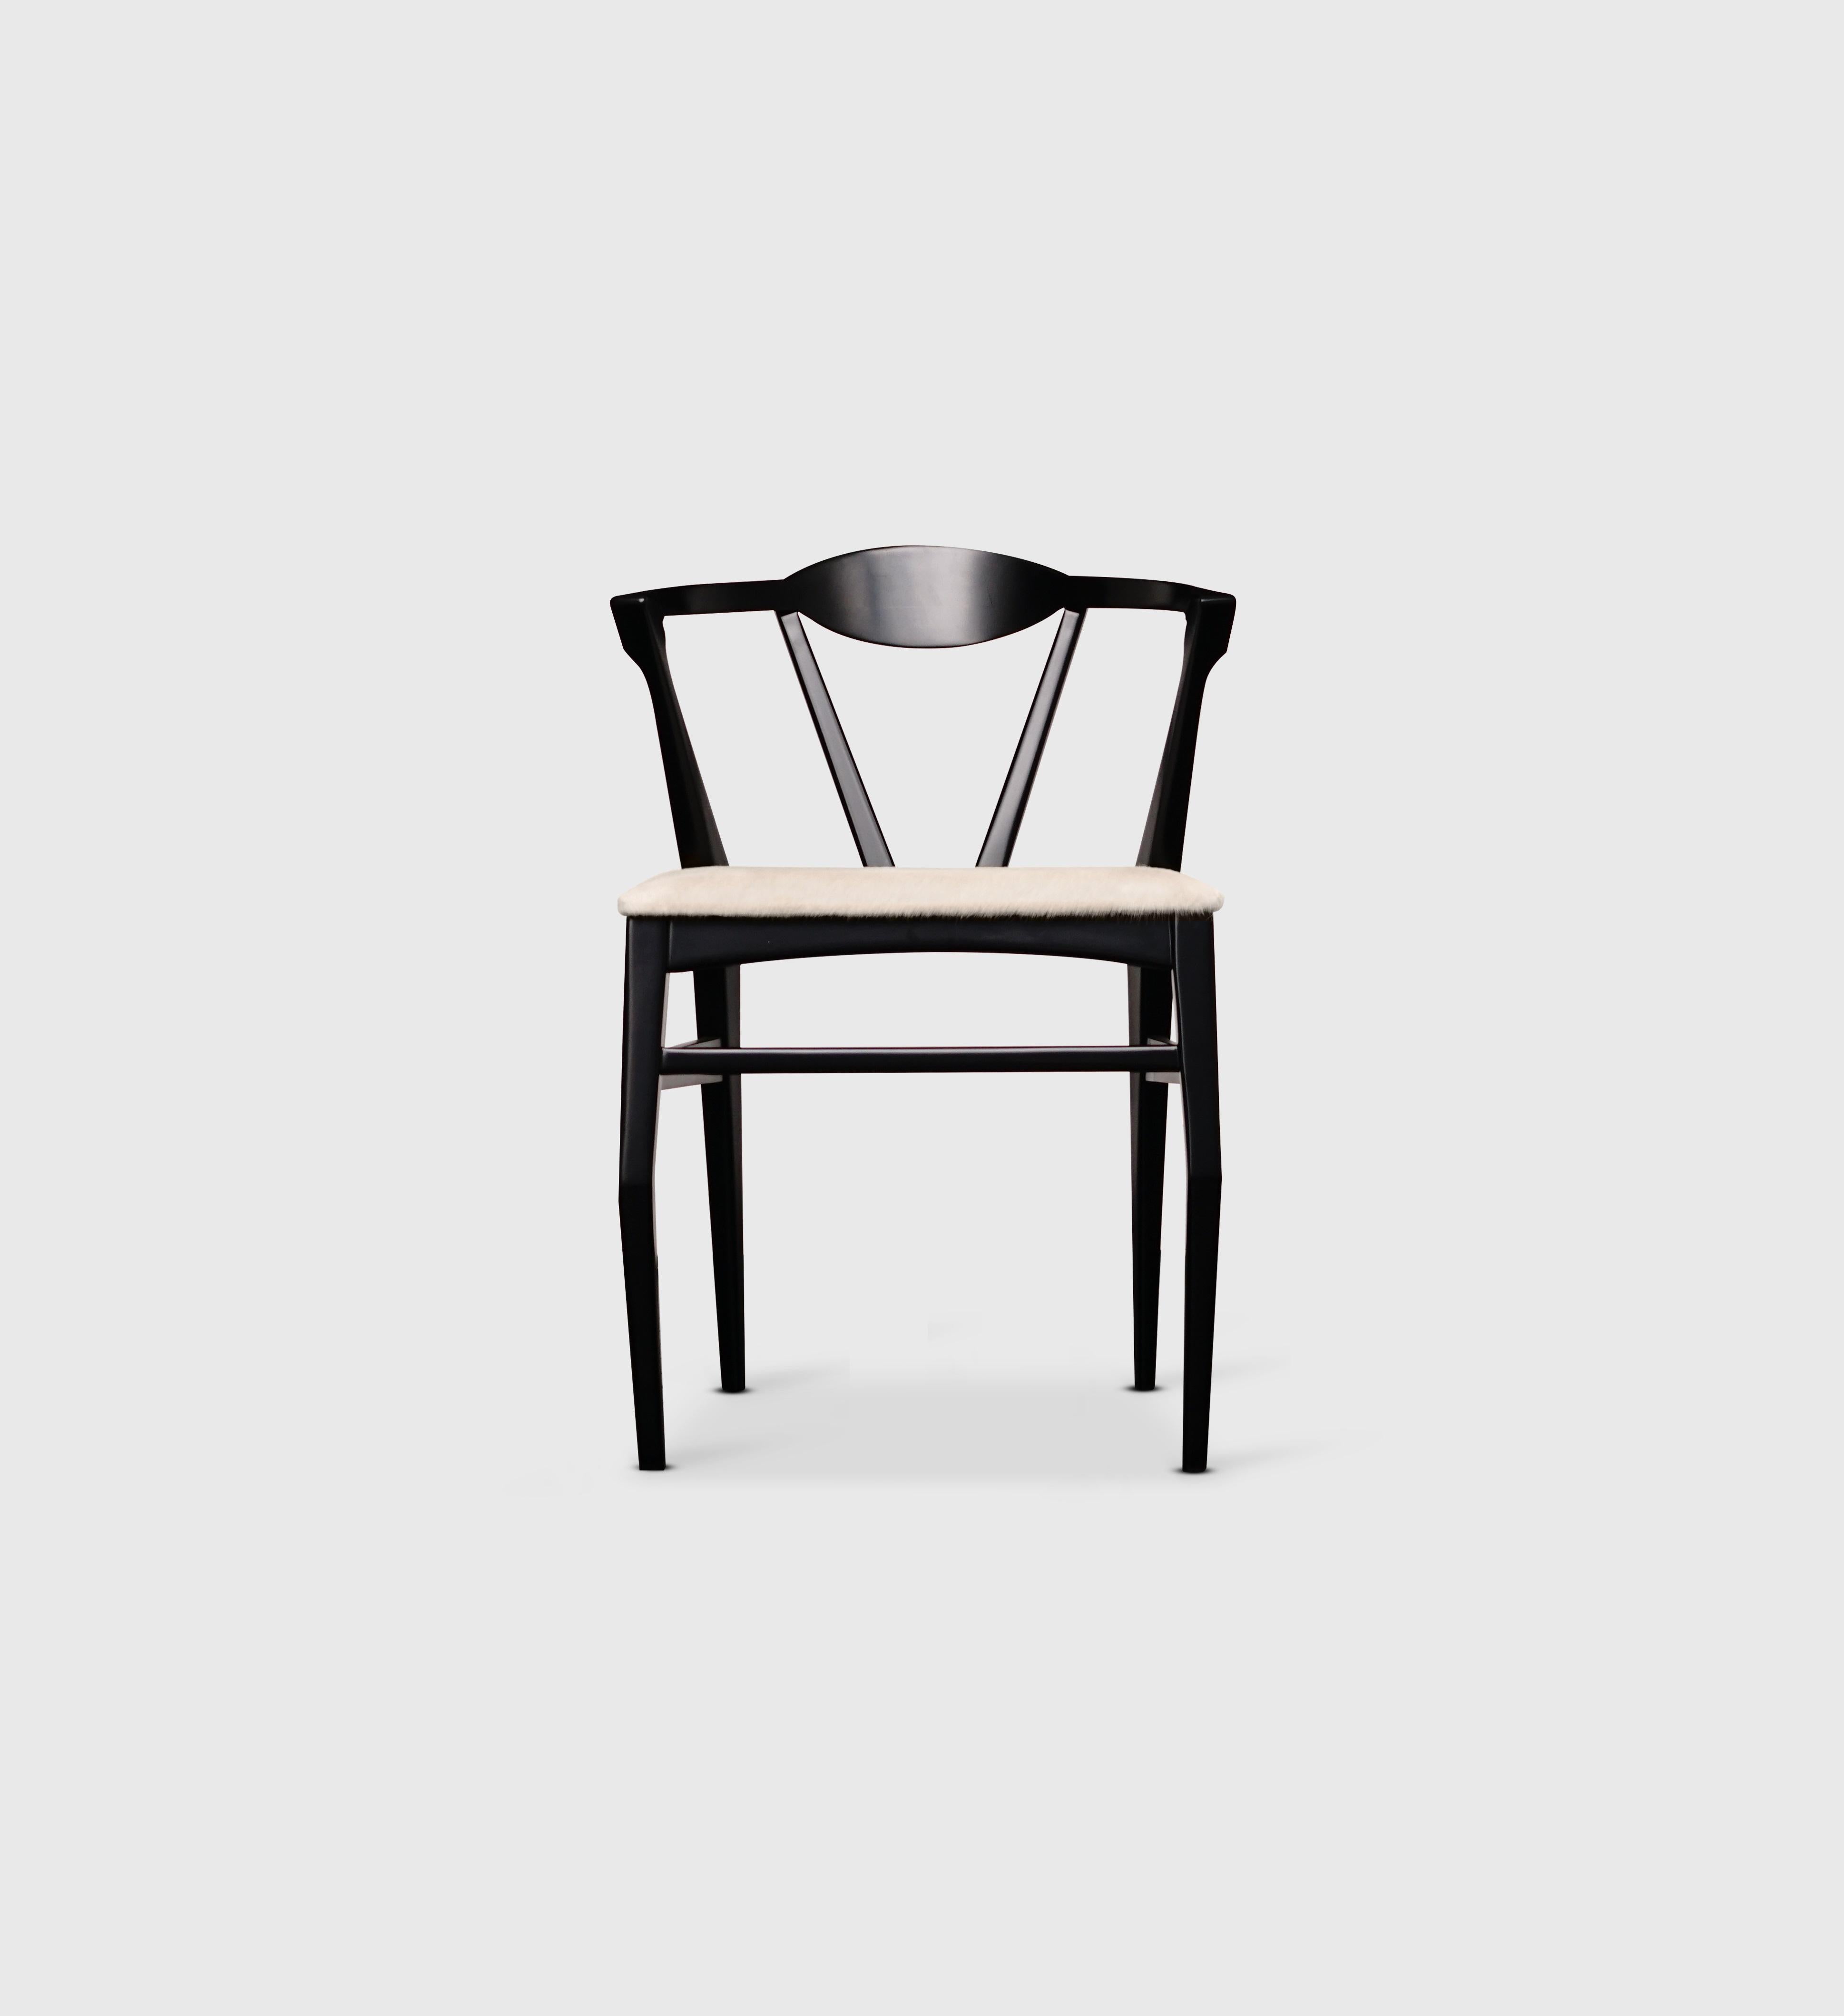 Arachnid dining chair by Atra Design
Dimensions: D 93 x W 53 x H 84 cm
Materials: walnut wood, fabric
Available in leather, rattan or fabric. Available in walnut, beech, maple or mohogamy wood frame.

Atra Design
We are Atra, a furniture brand